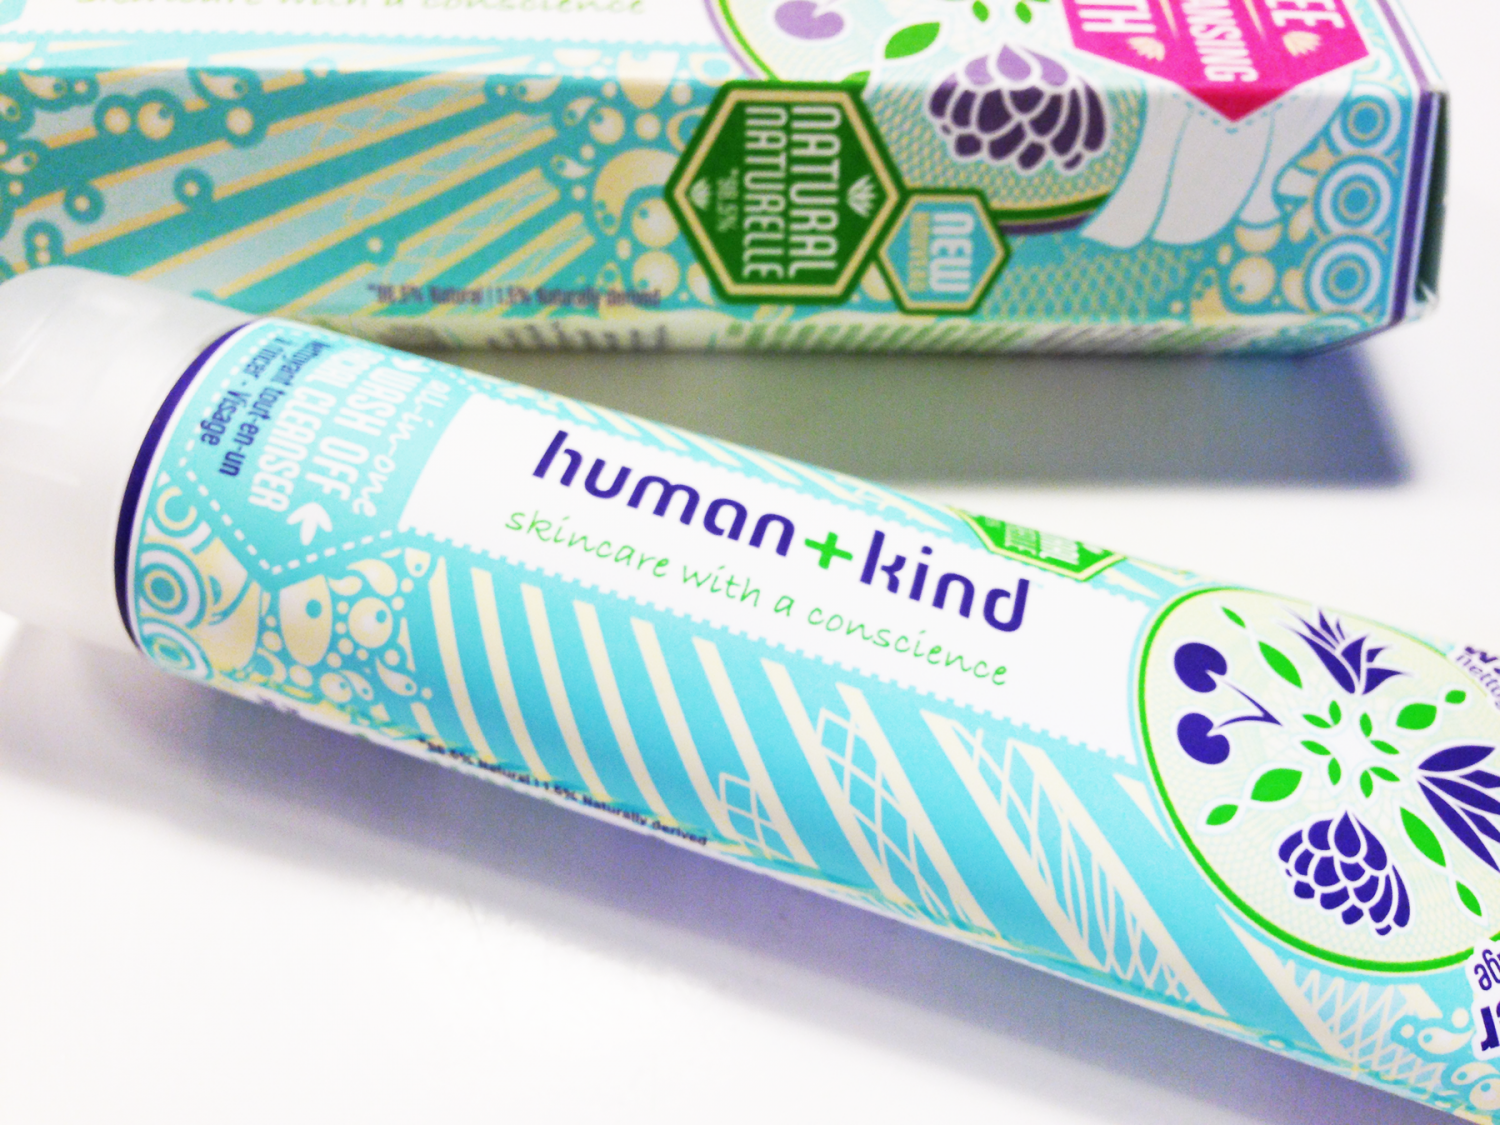 Human + Kind Facial Cleanser